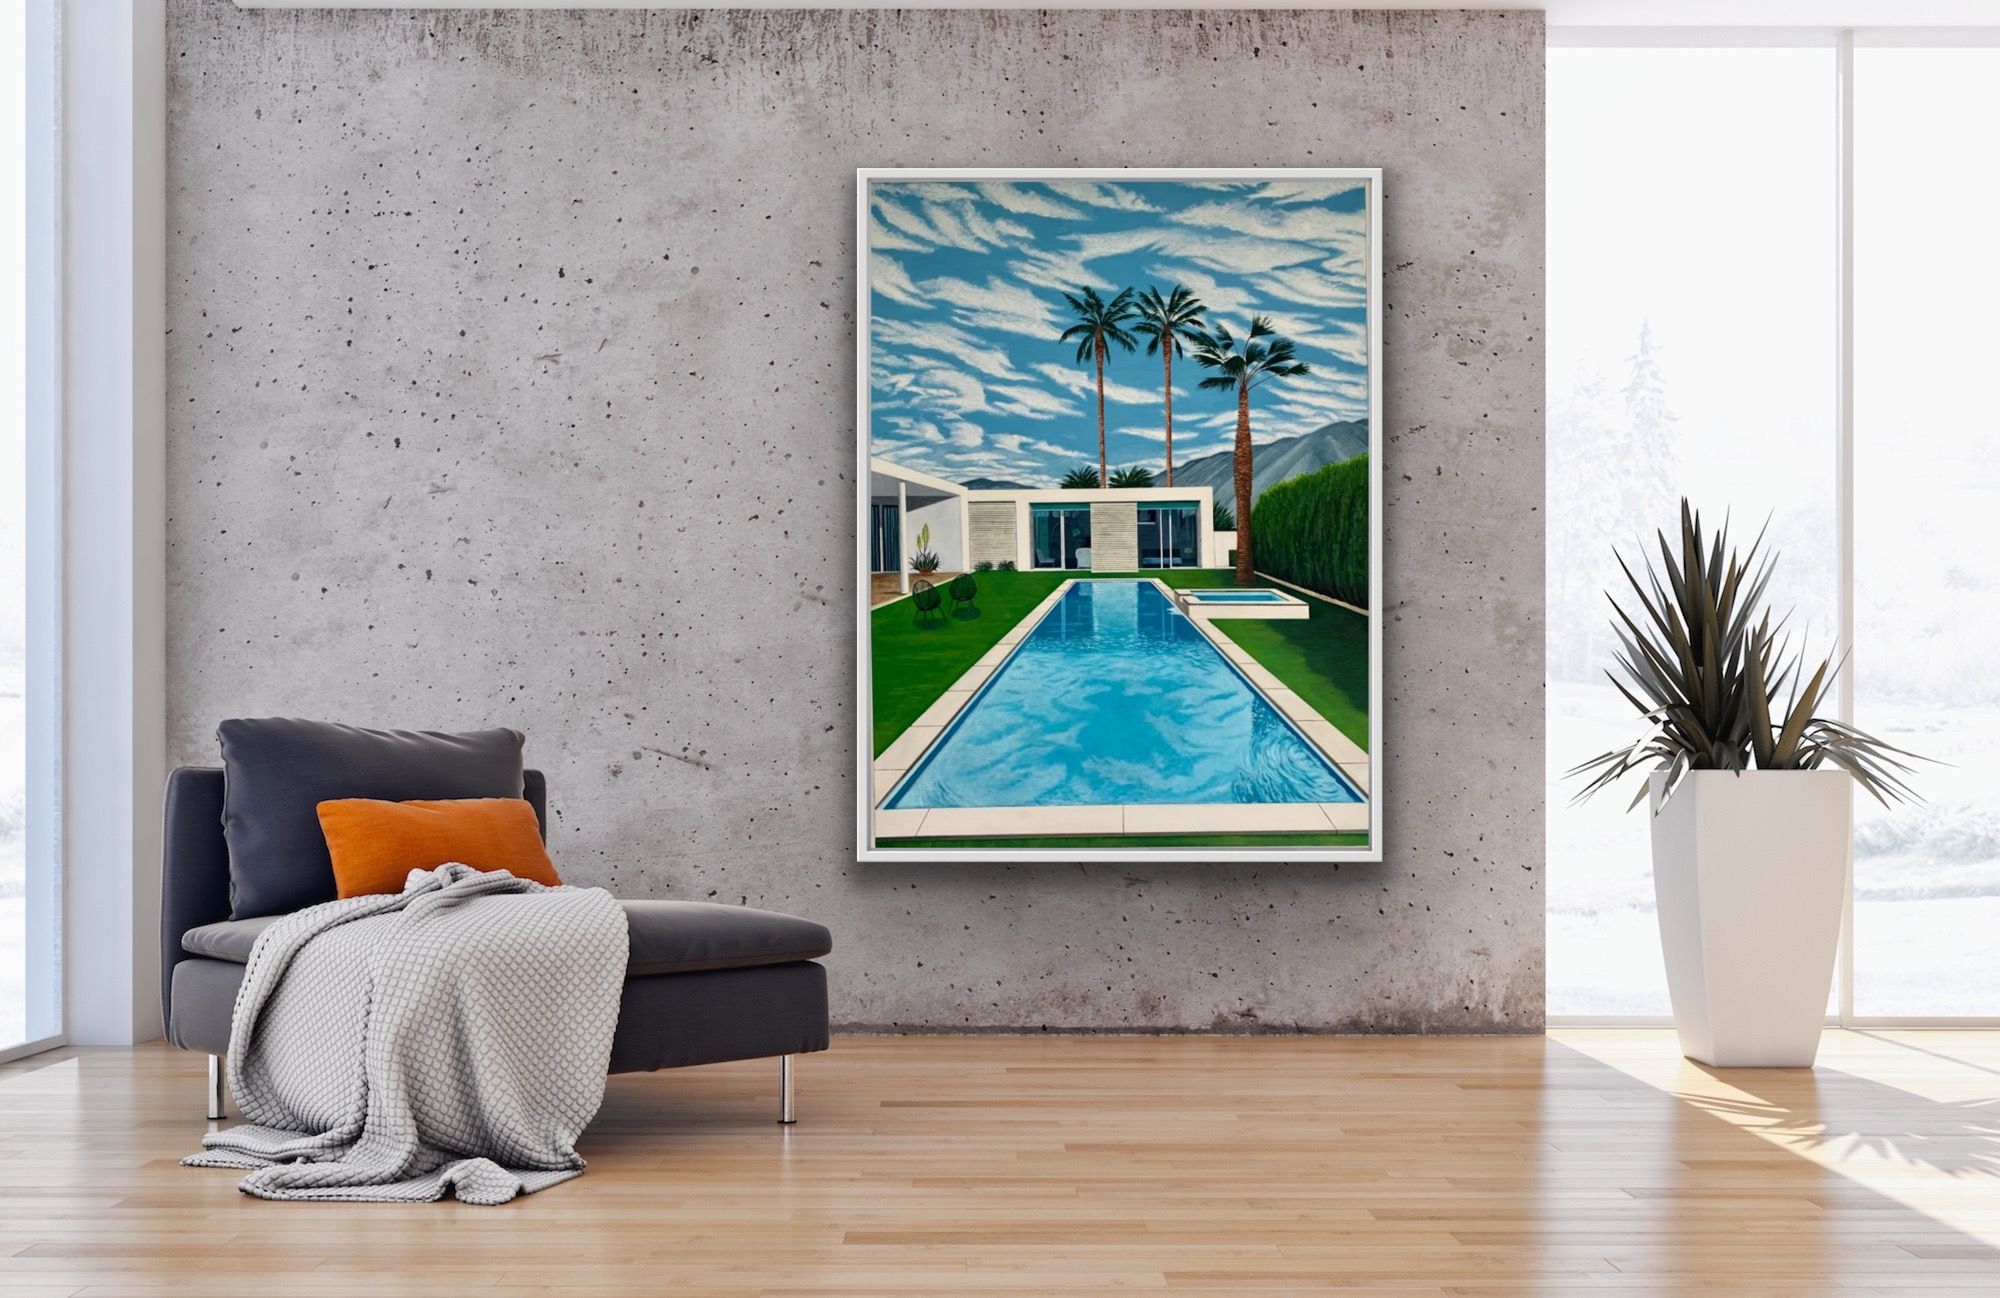 Cloudy Pool with Acapulco Chairs by Karen Lynn - Secondary Image